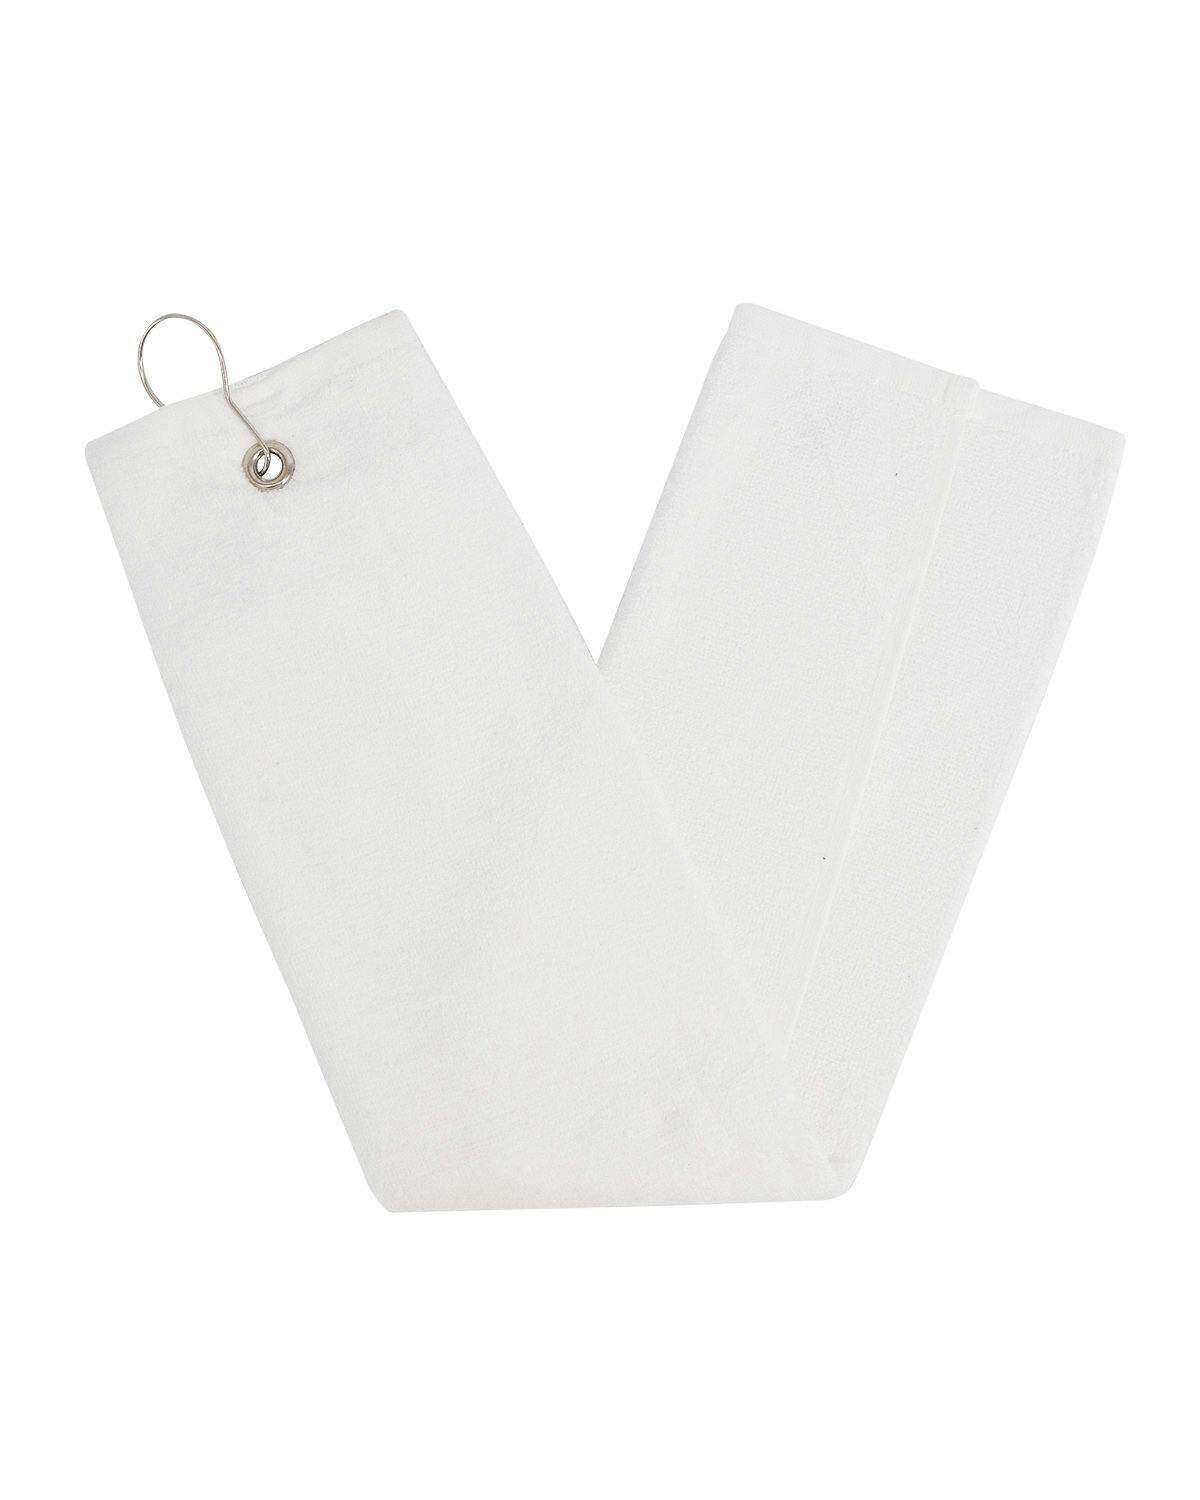 Image for Trifold Golf Towel with Grommet and Hook